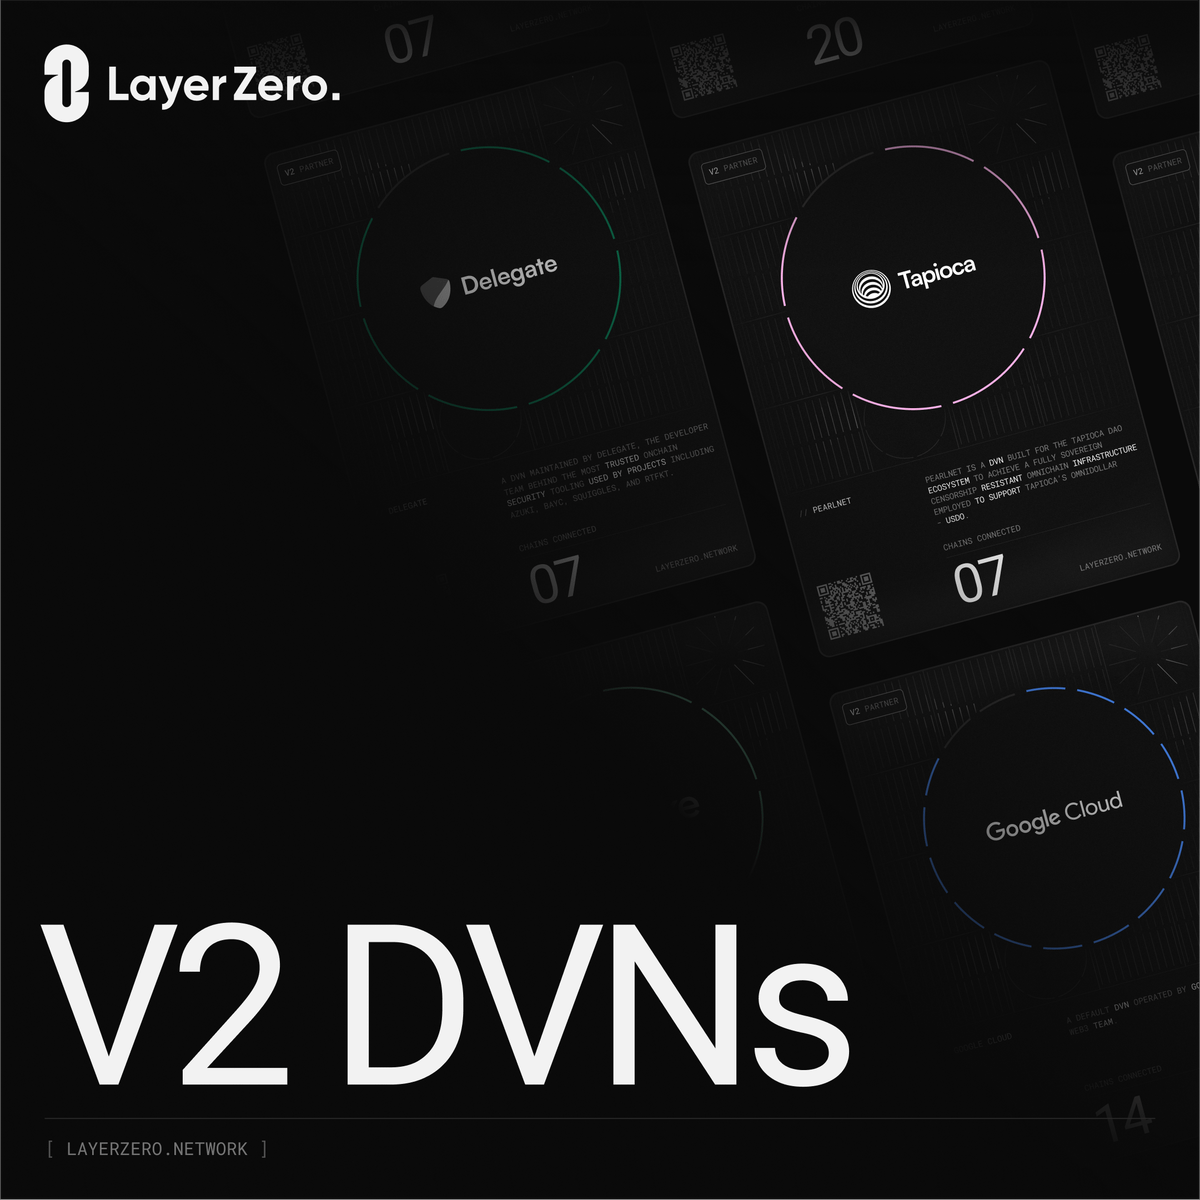 🔒Decentralized Verifier Networks (DVNs)🔒 Own your security. Choose how messages are verified. Configure a Security Stack based on your application's use case. A🧵 on DVNs available in V2 ↓